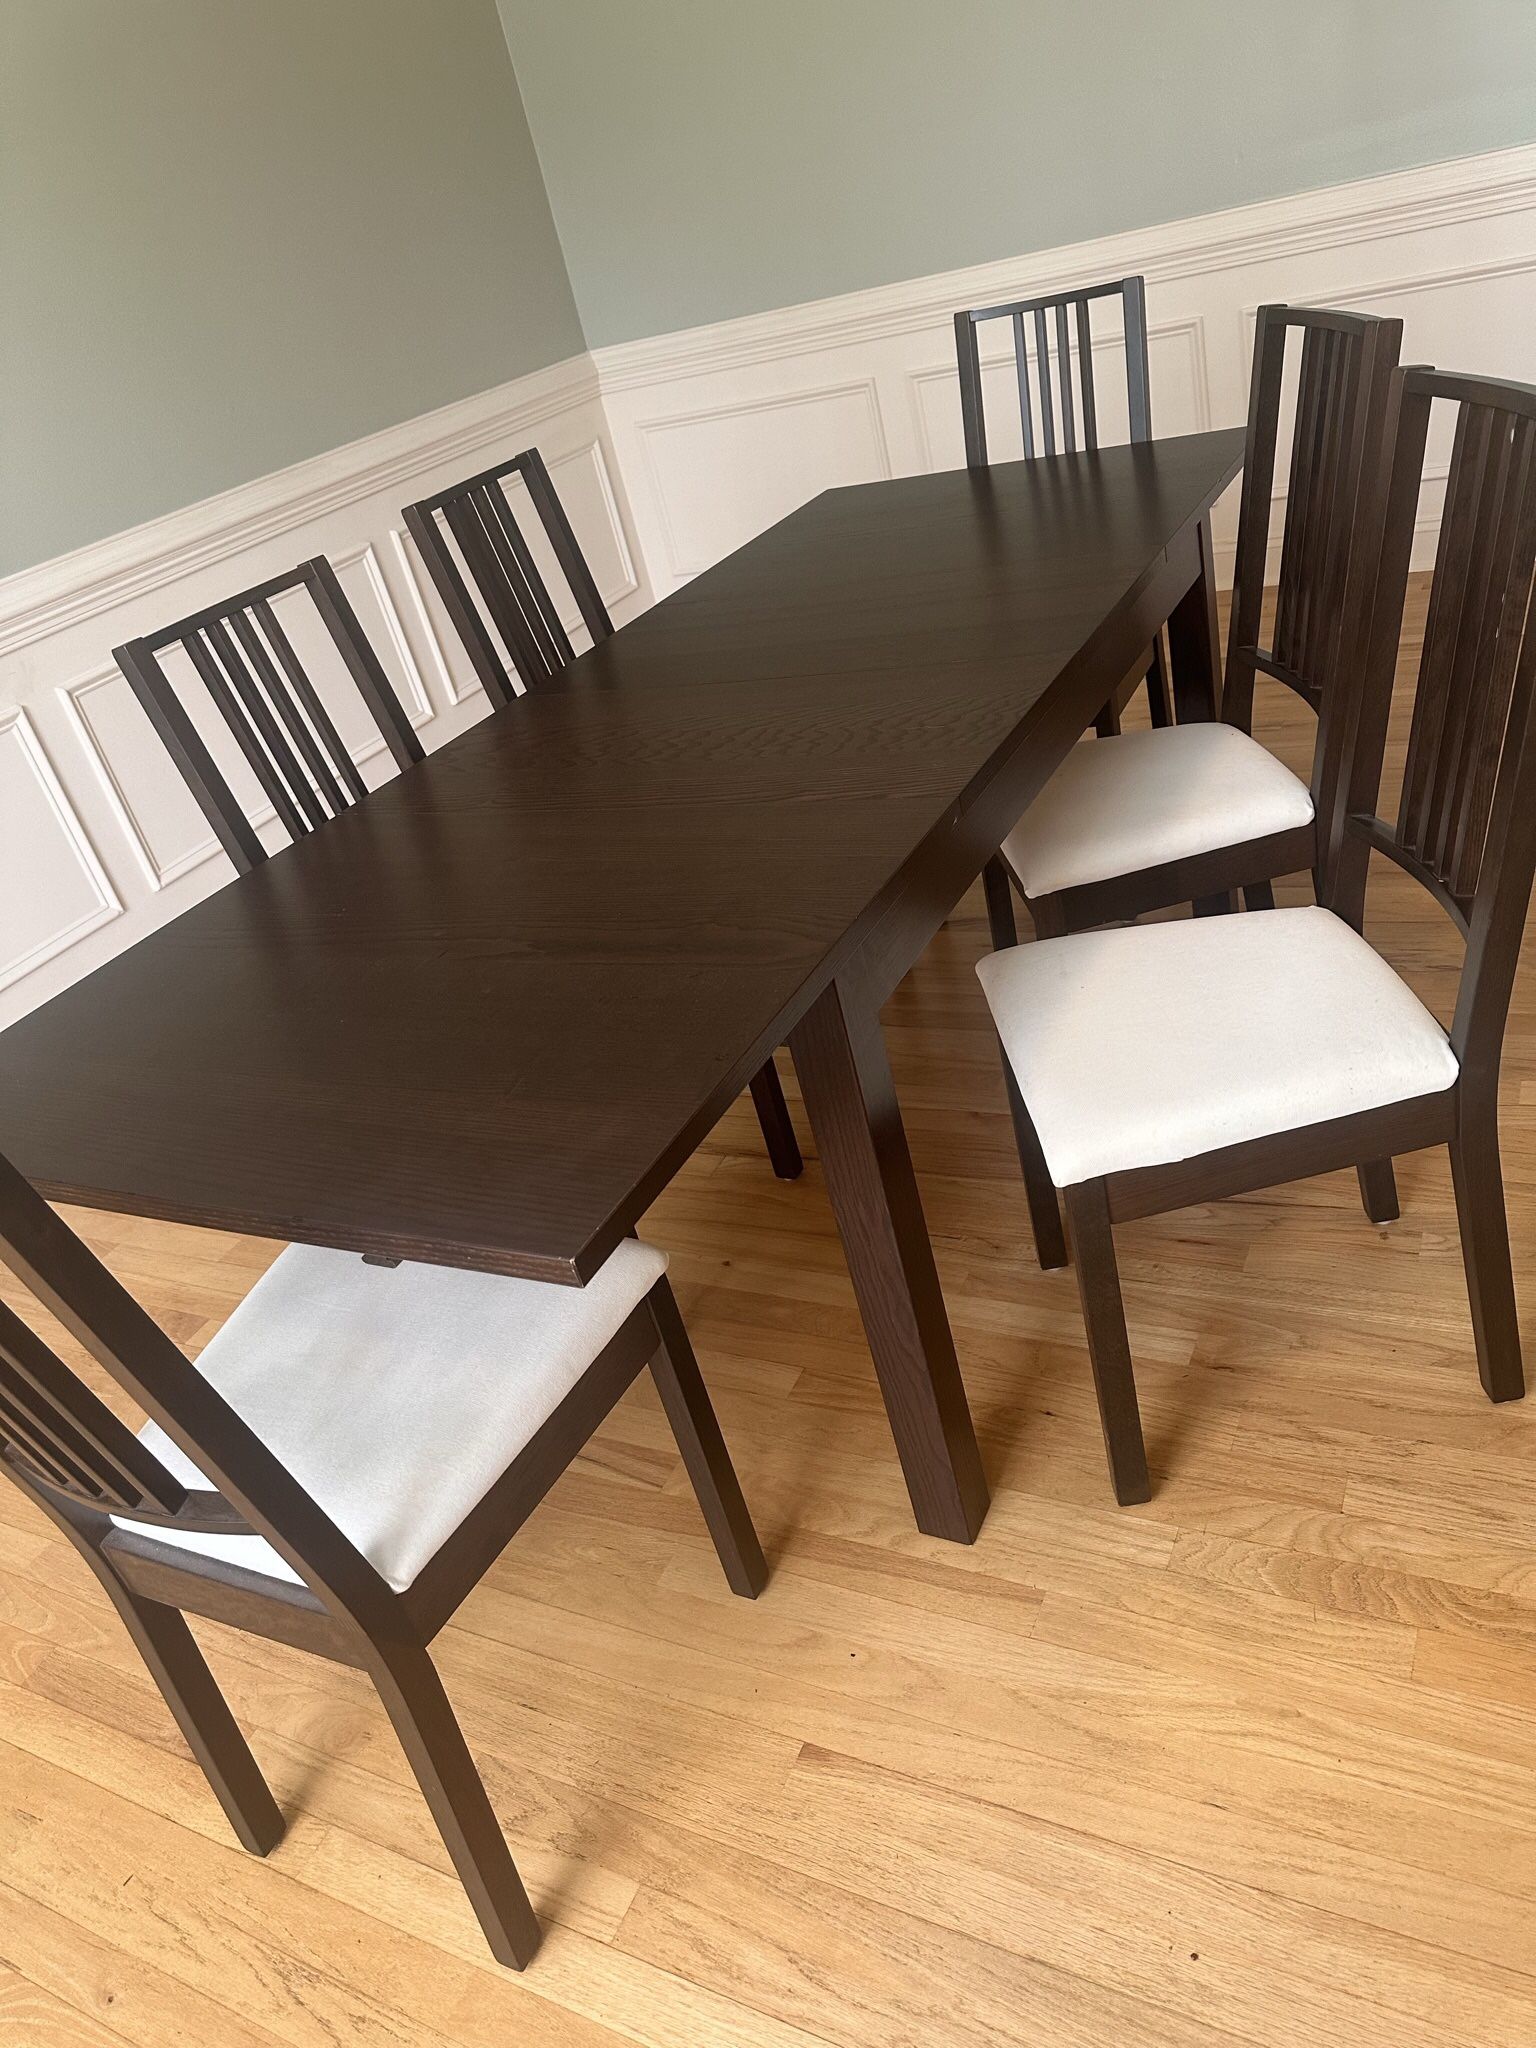 Extending 6 person mahogany dinning table with chairs